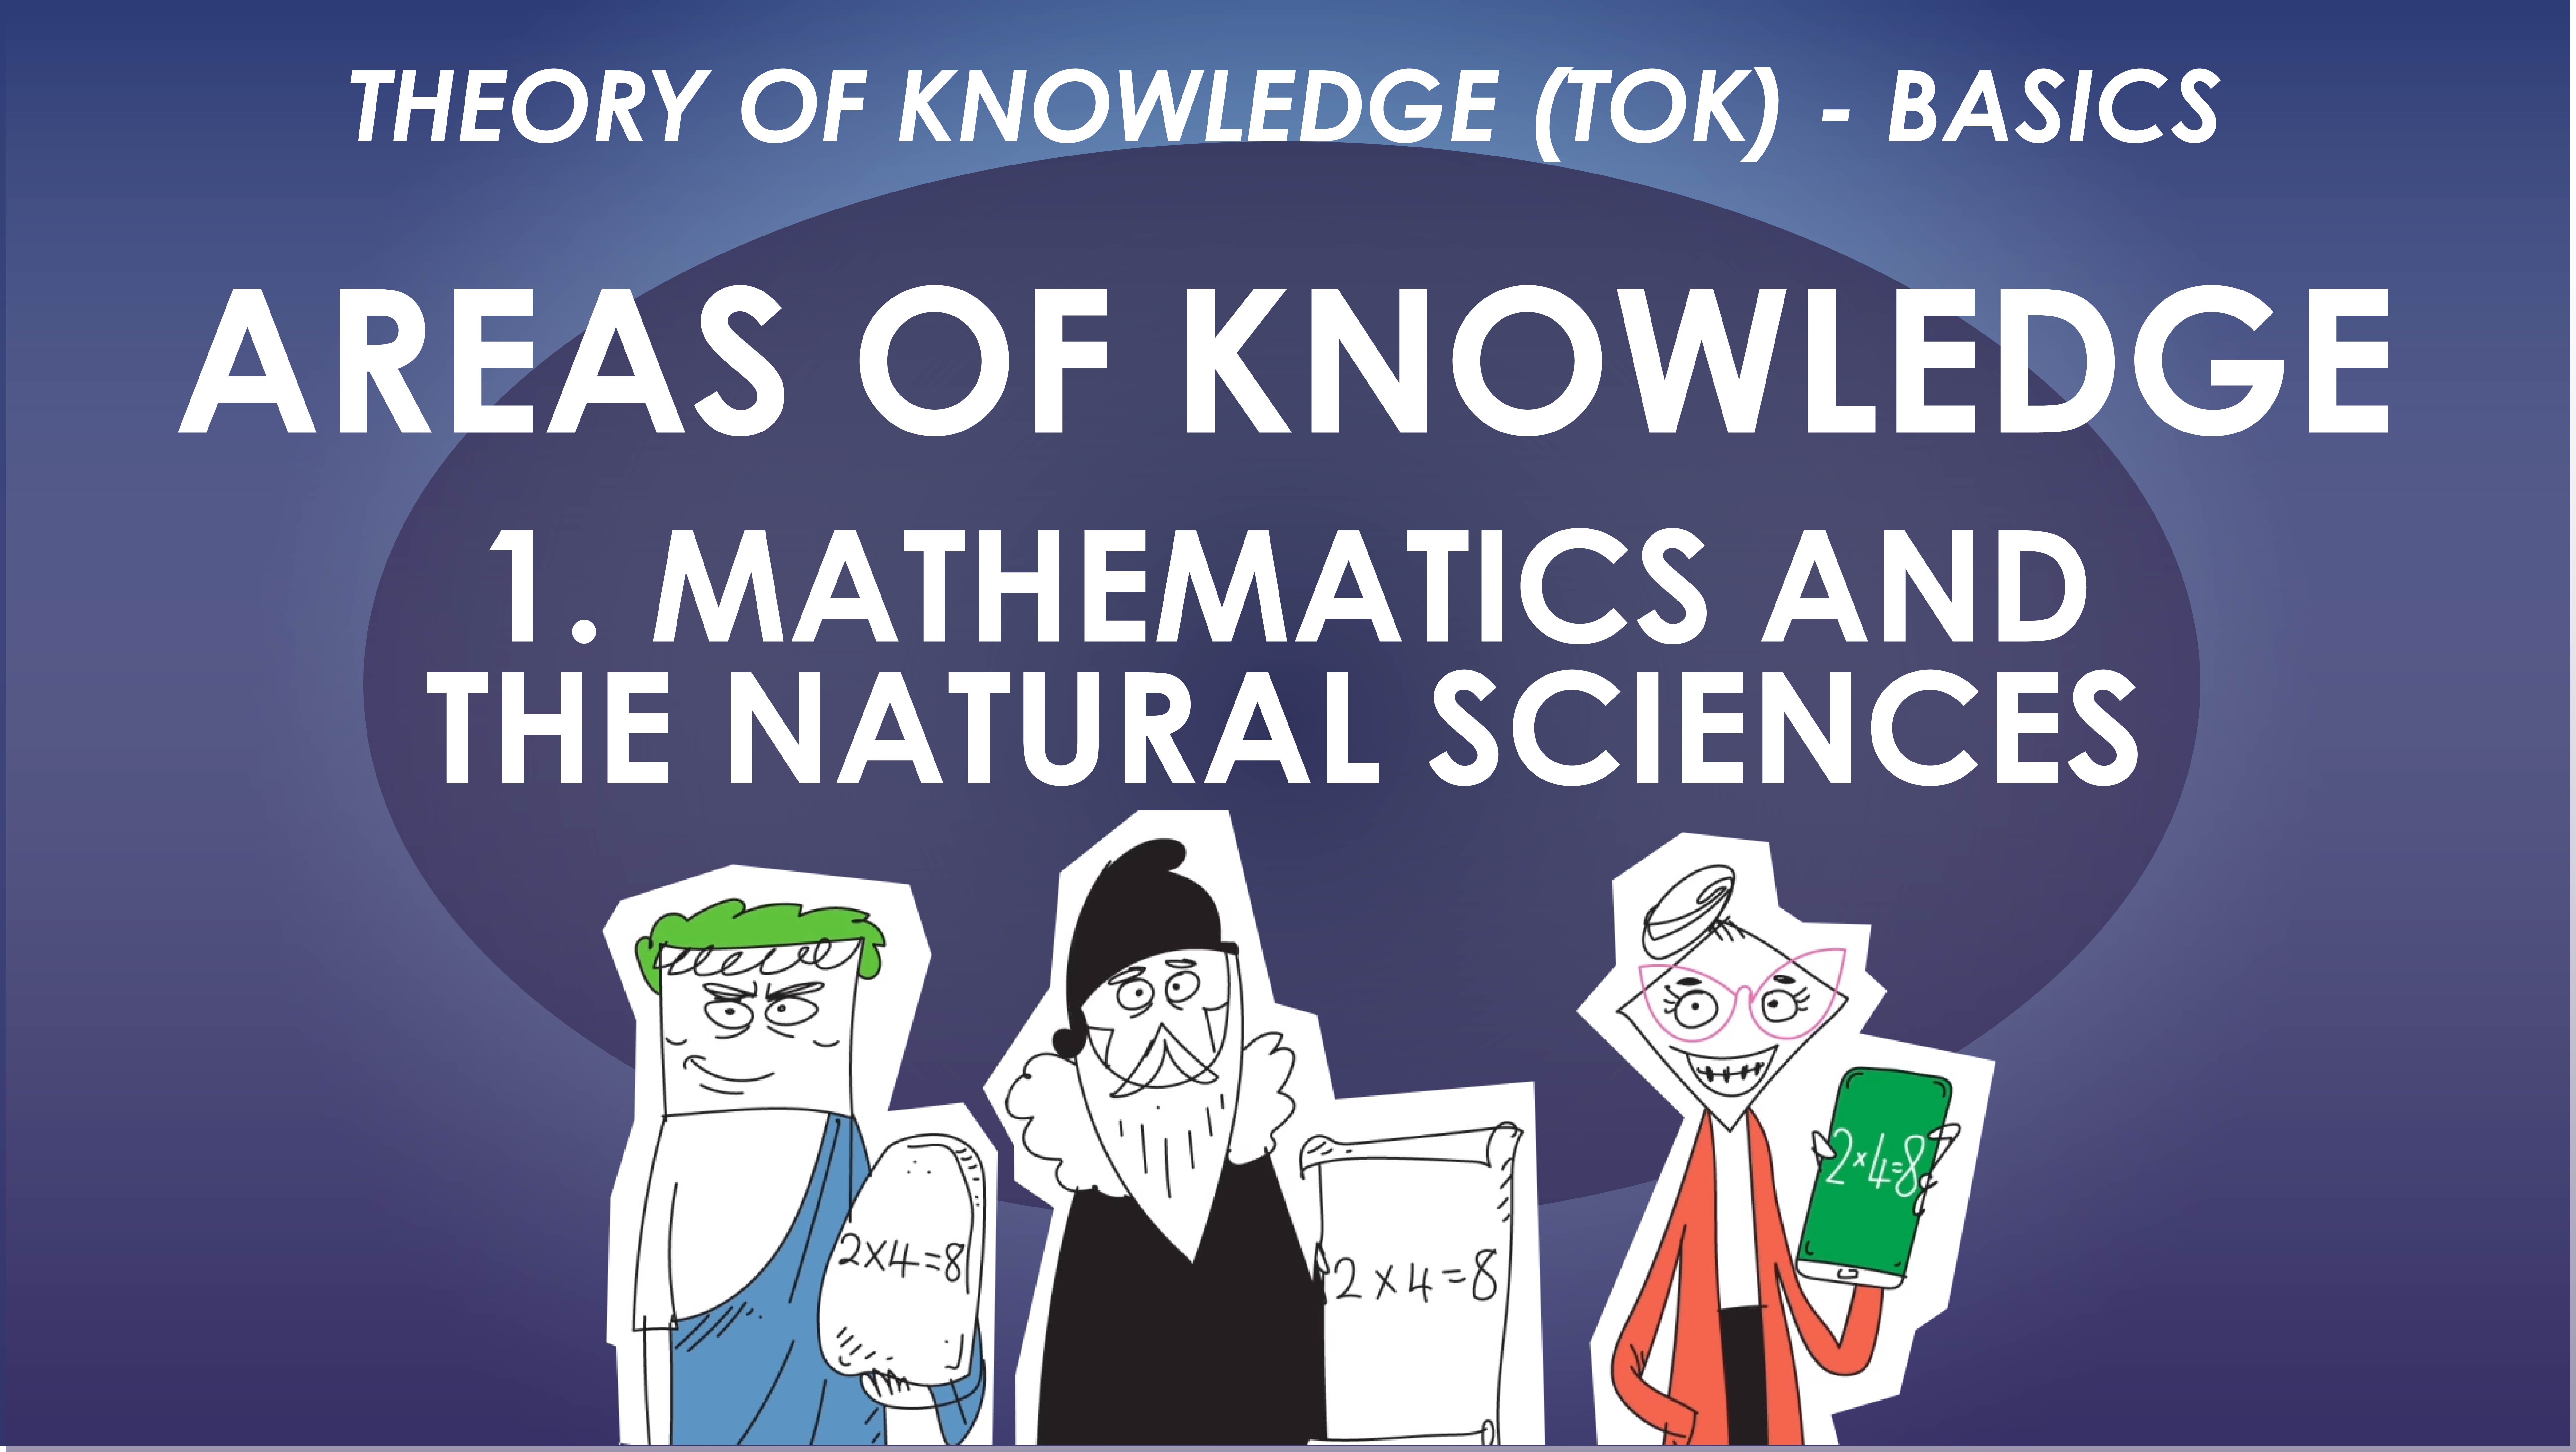 Tackling TOK - Basics - Areas of Knowledge - 1. Mathematics and the Natural Sciences